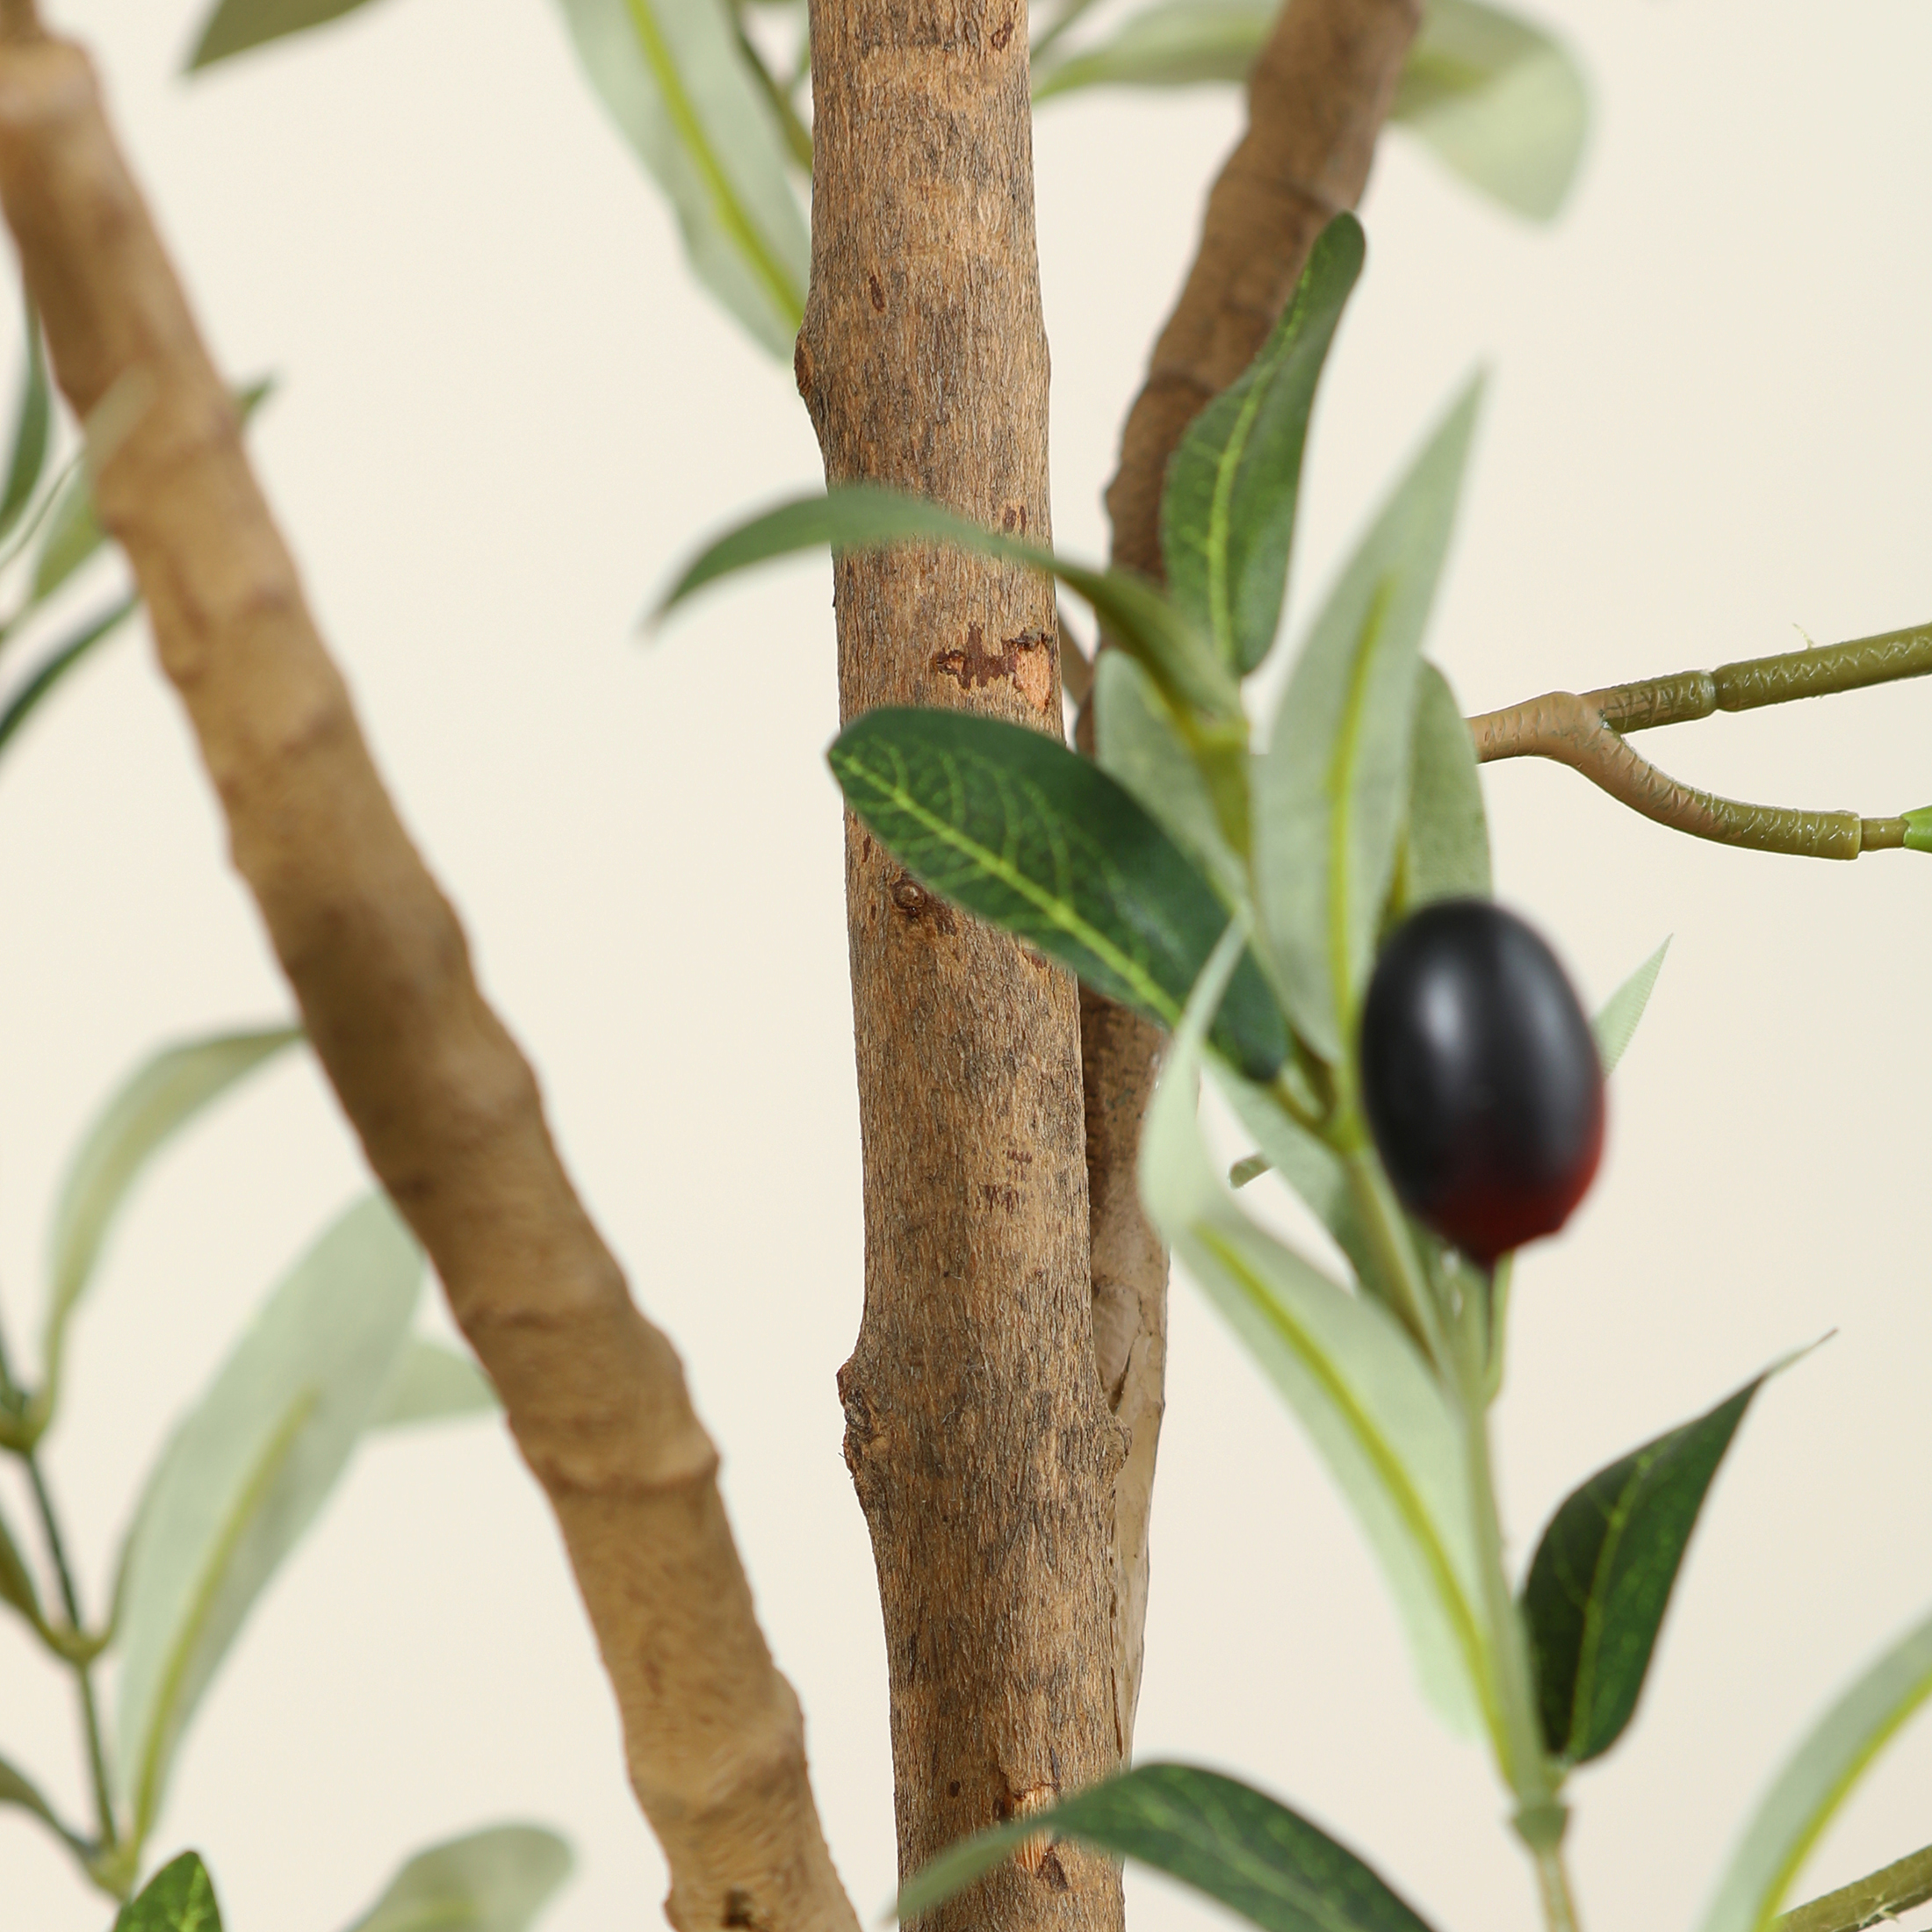 7 ft Artificial Olive Plants with Realistic Leaves and Natural Trunk, Silk Fake Potted Tree with Wood Branches and Fruits, Faux Olive Tree for Office Home Decor - image 3 of 8